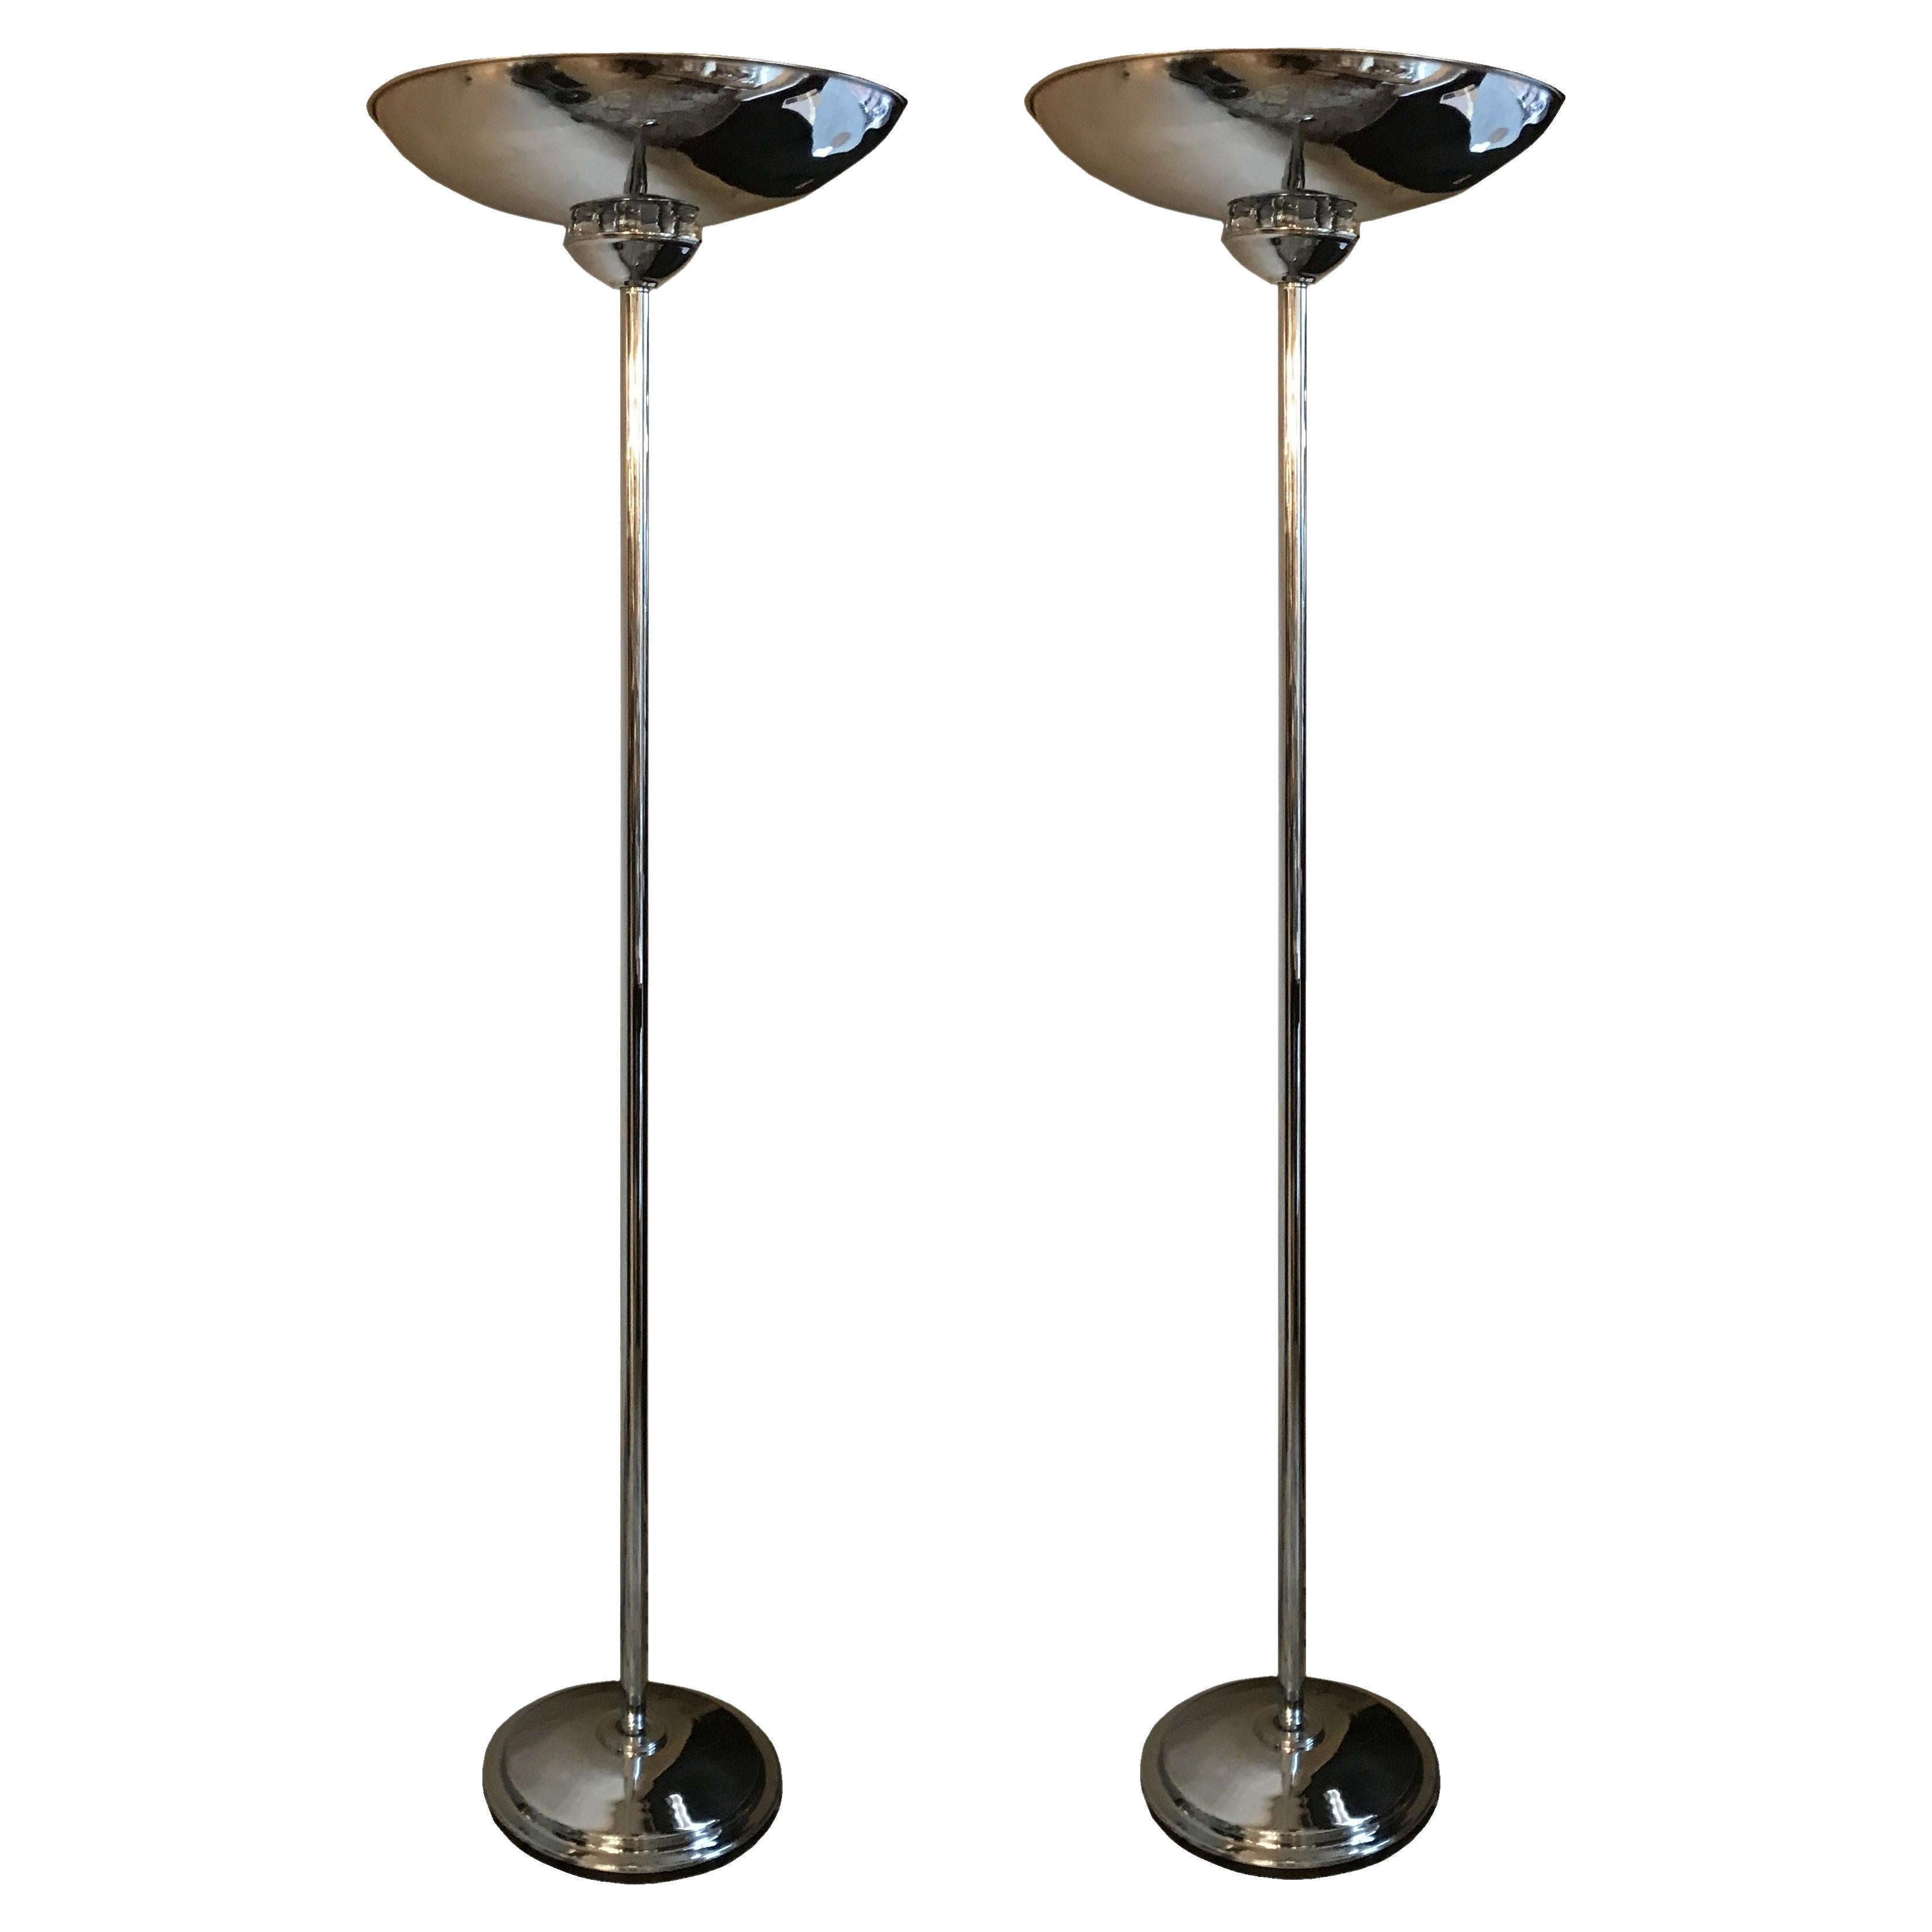 2 Art Deco Floor Lamps, France, Materials: Glass and Chrome, 1930 For Sale